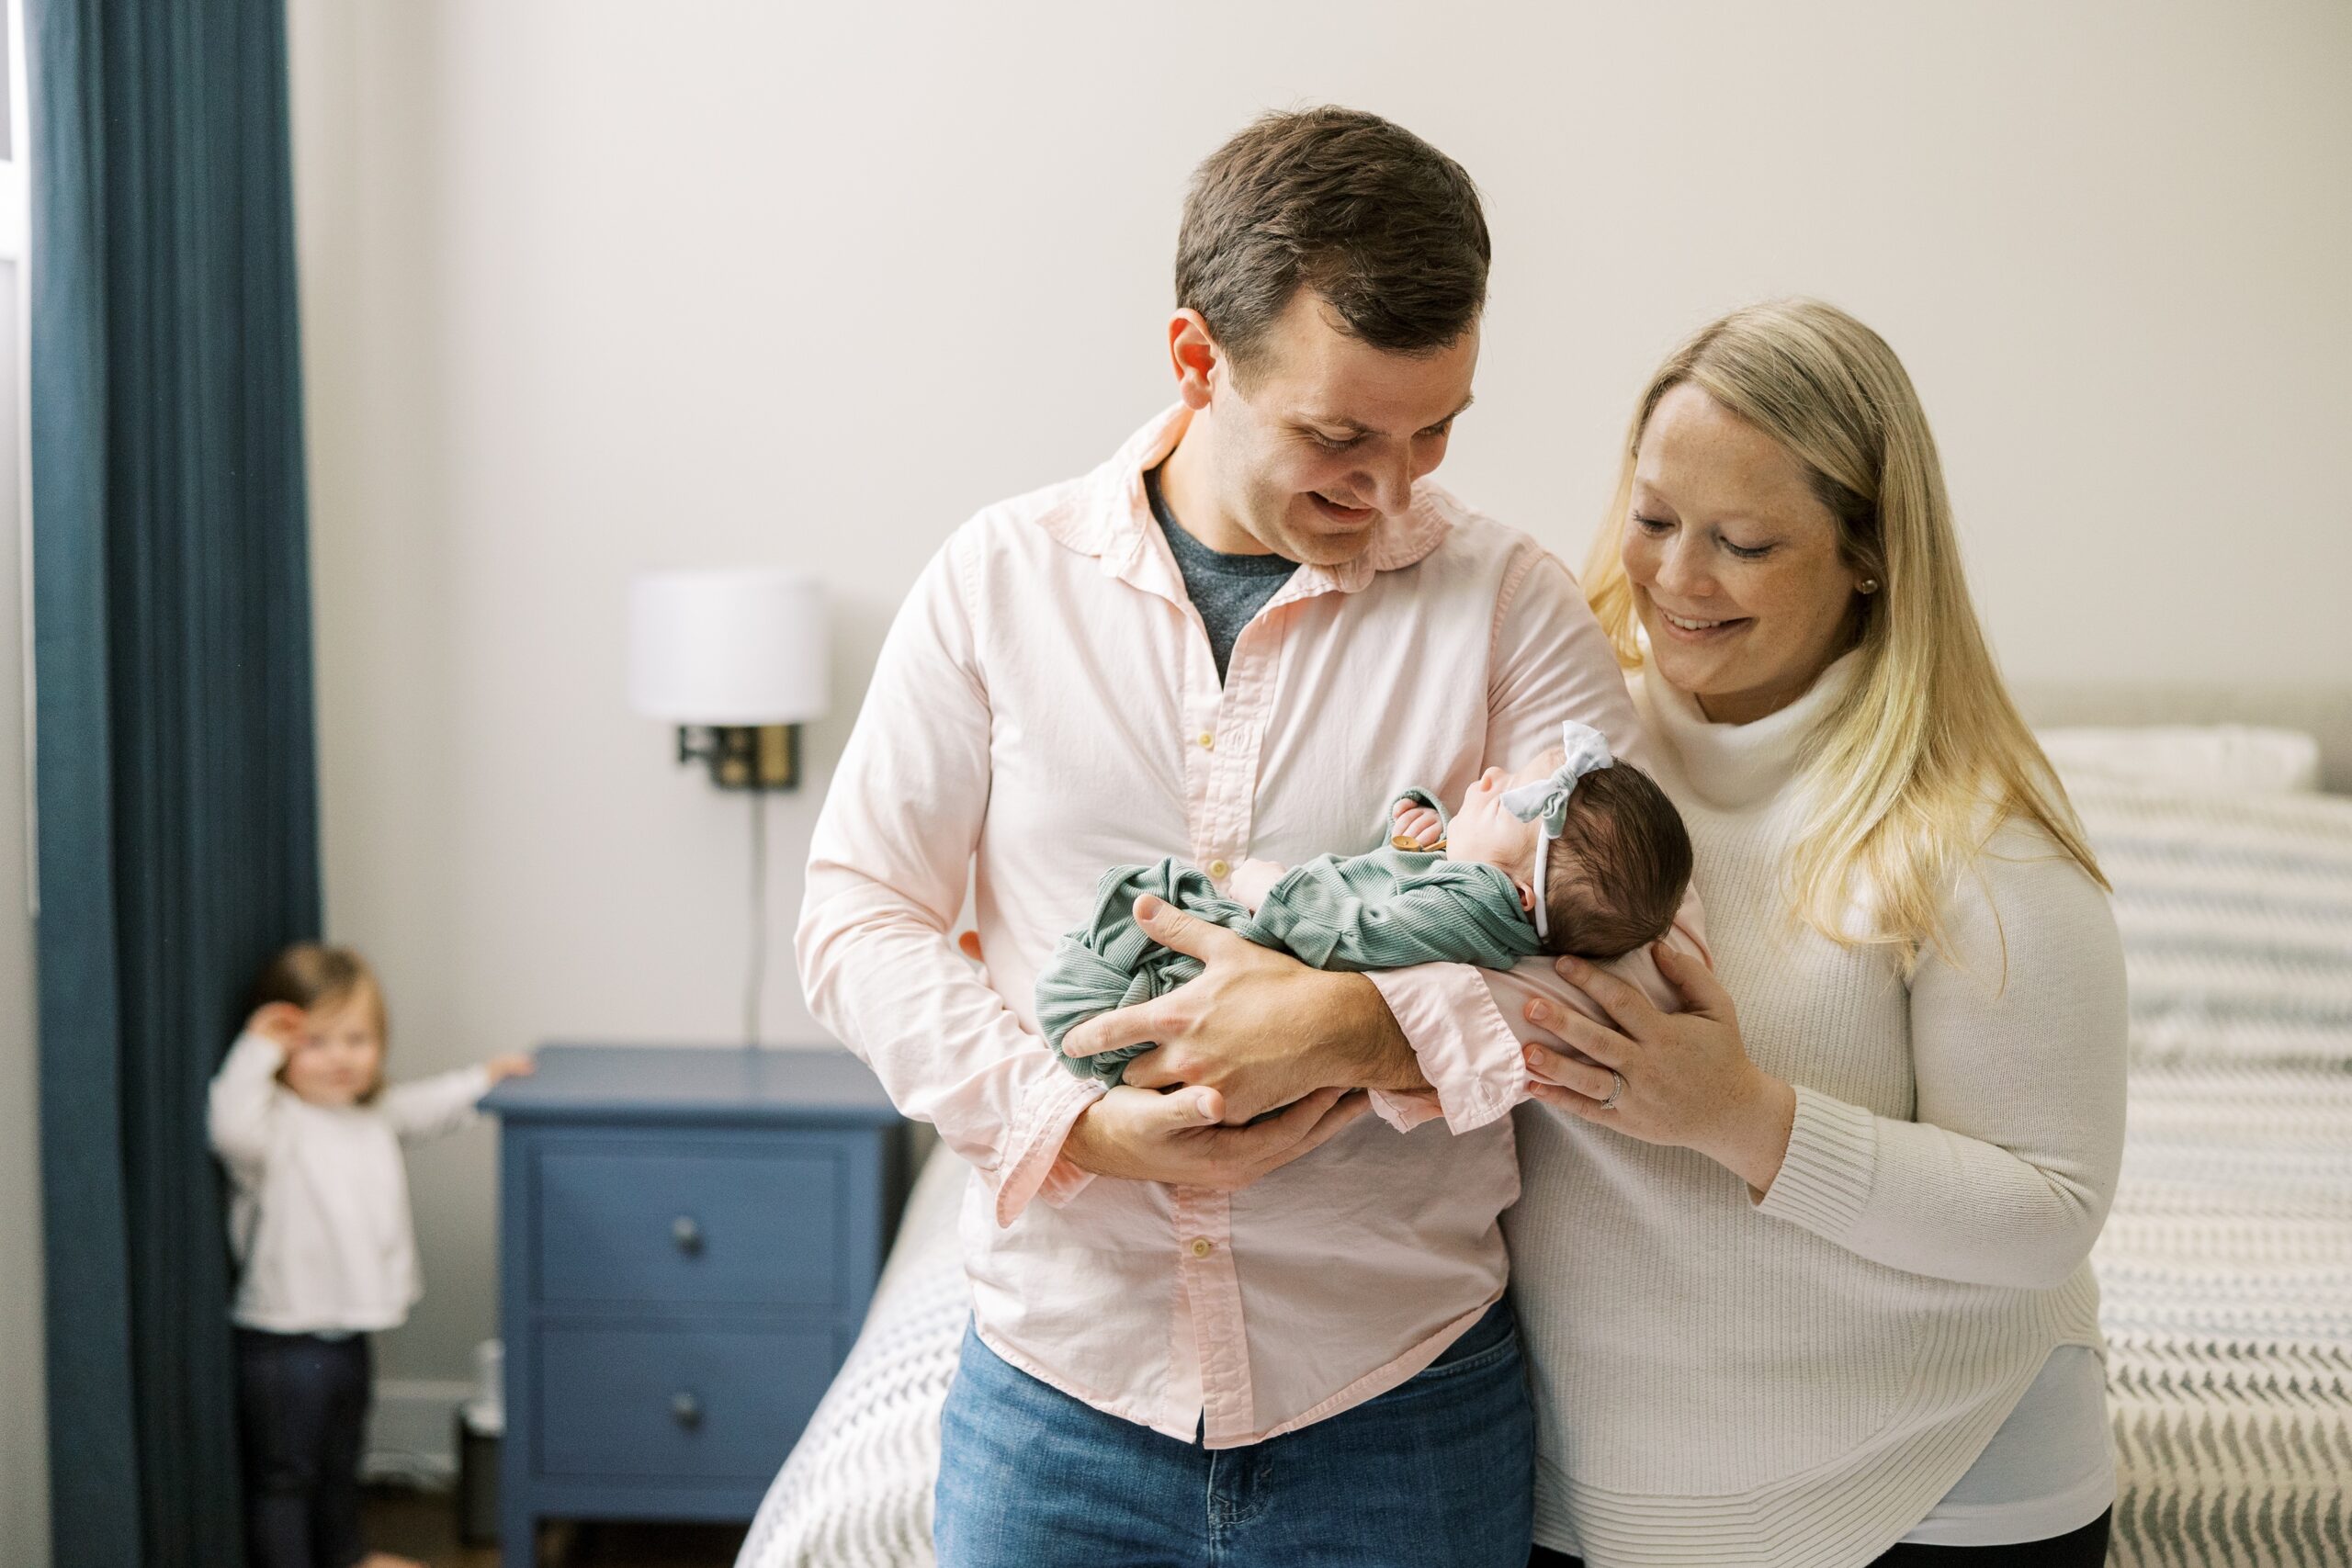 Mom and dad smile at baby during intimate at home newborn photoshoot